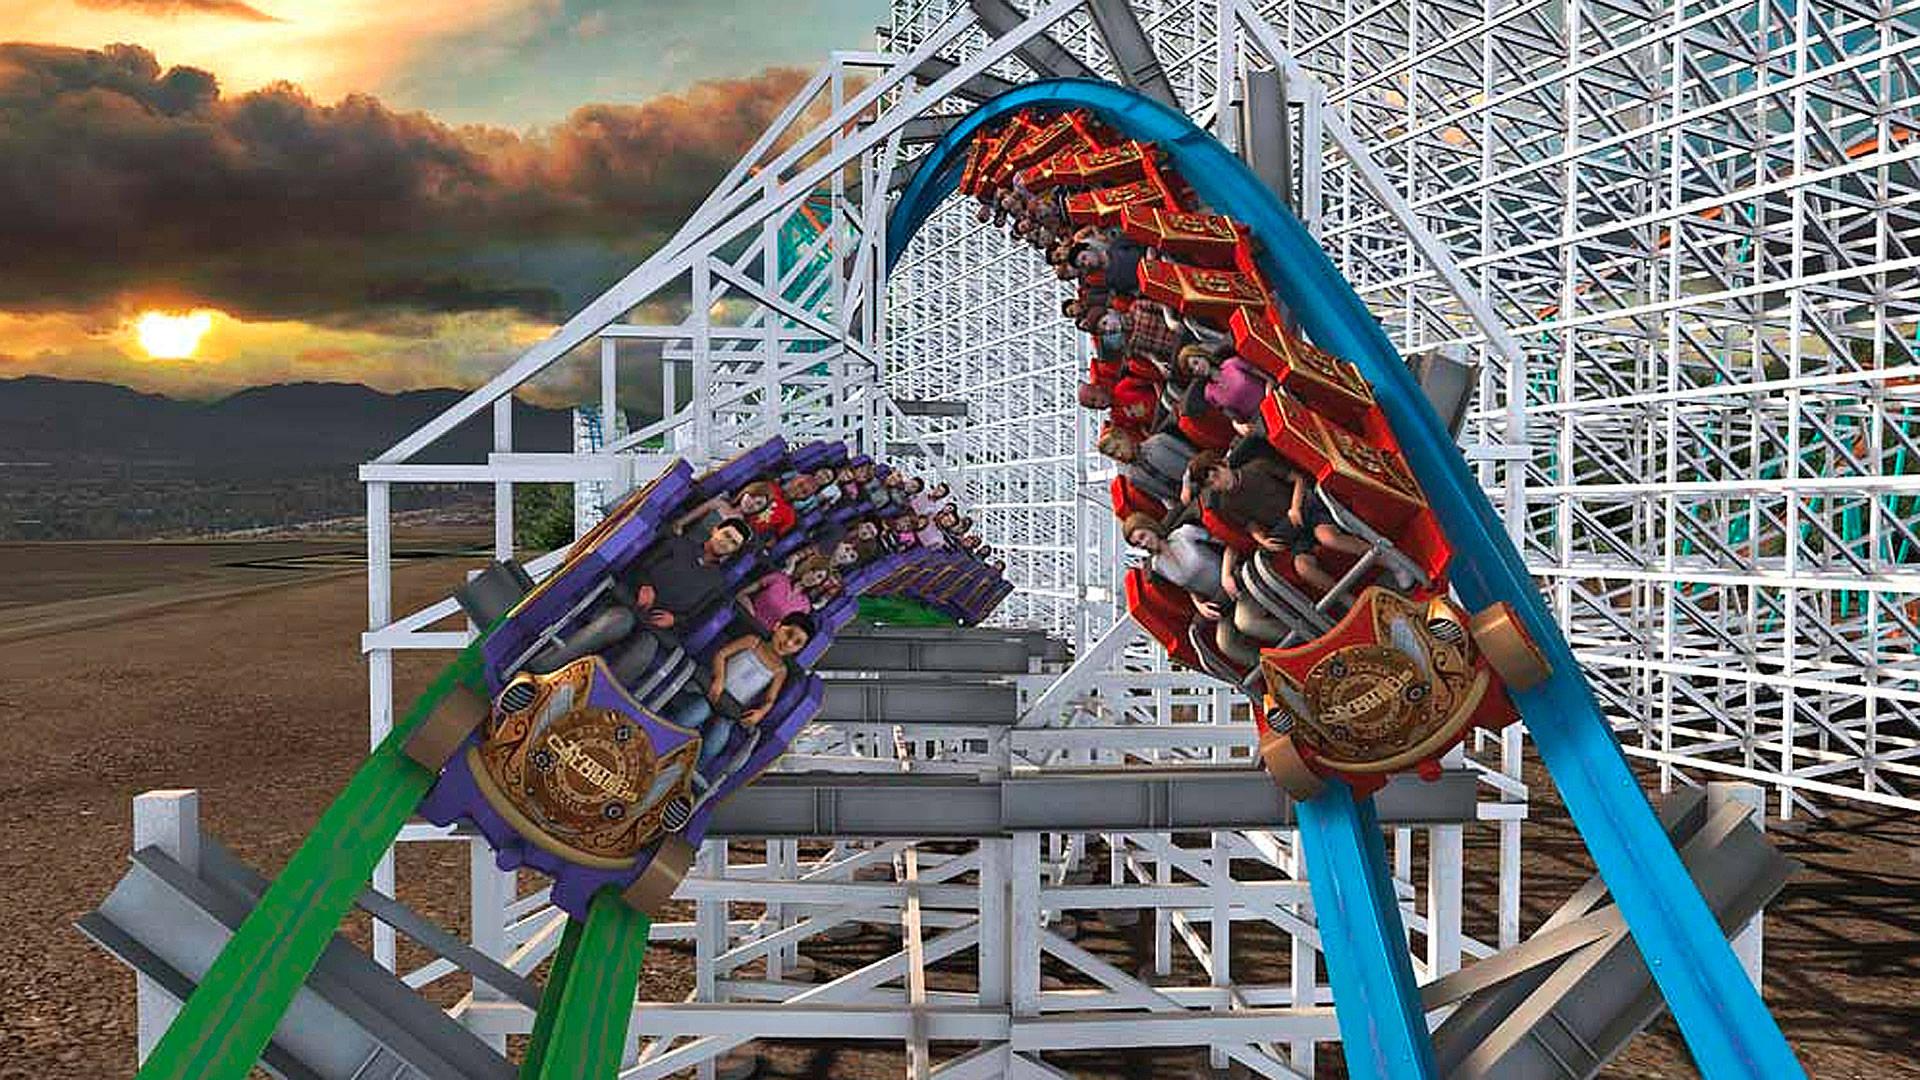 Six Flags Magic Mountain RollerCoaster Twisted Colossus